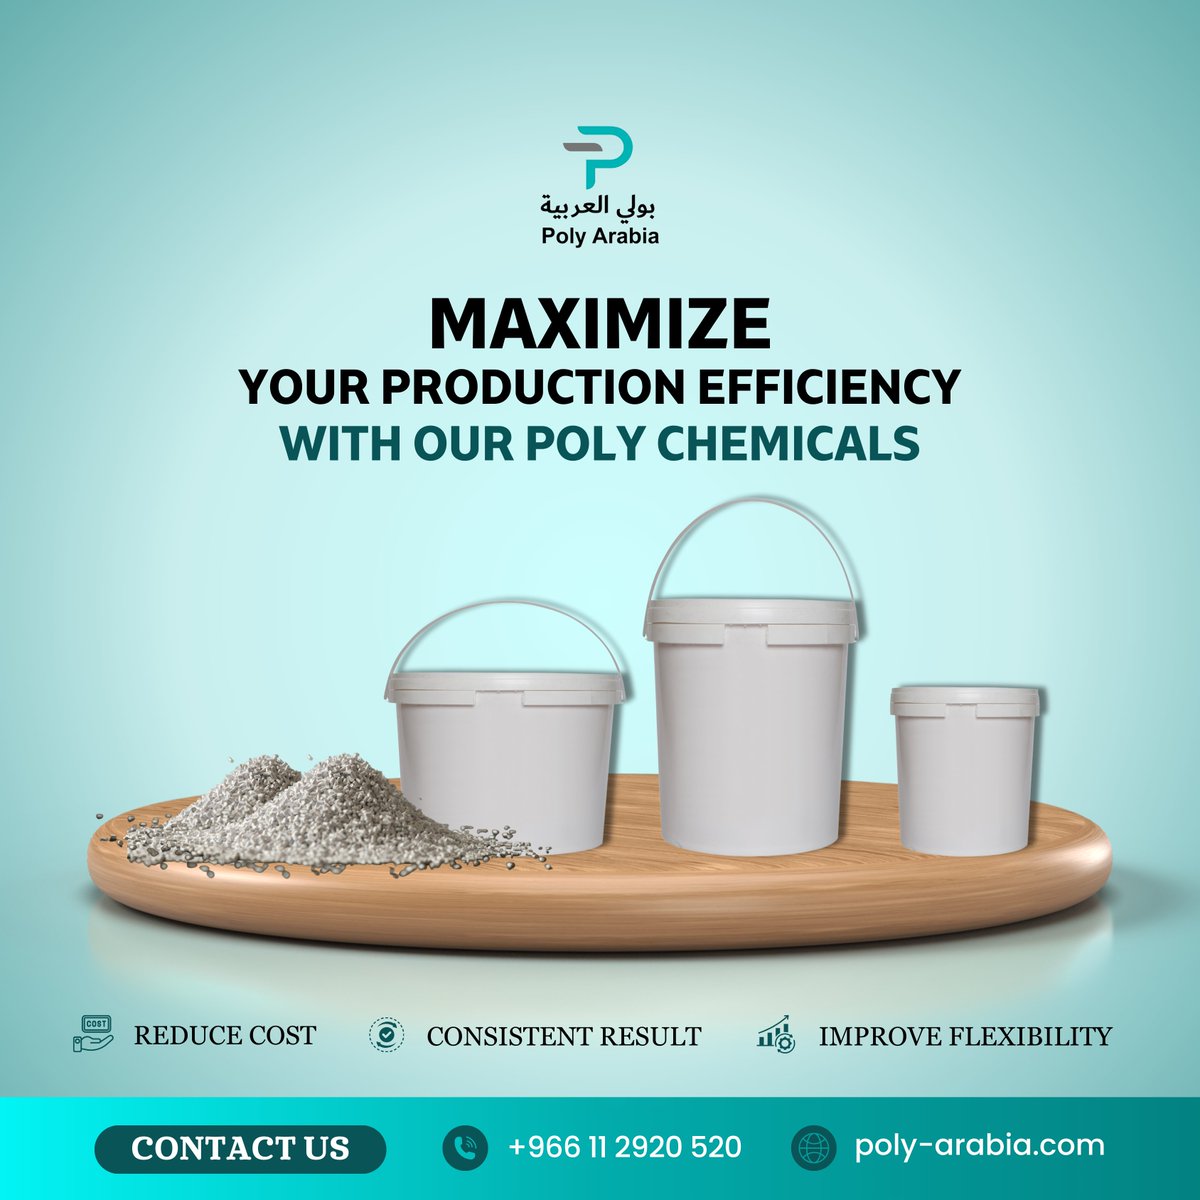 Maximize your production efficiency with our poly chemicals.
Our Services :-
> Polymer Supplies
> Marketing & Distribution
> Supply chain Services
> Financial Services etc.

#PolyArabia #PlasticInnovation #RawMaterials #SustainablePlastics #InnovateWithPolyArabia #PlasticSolution